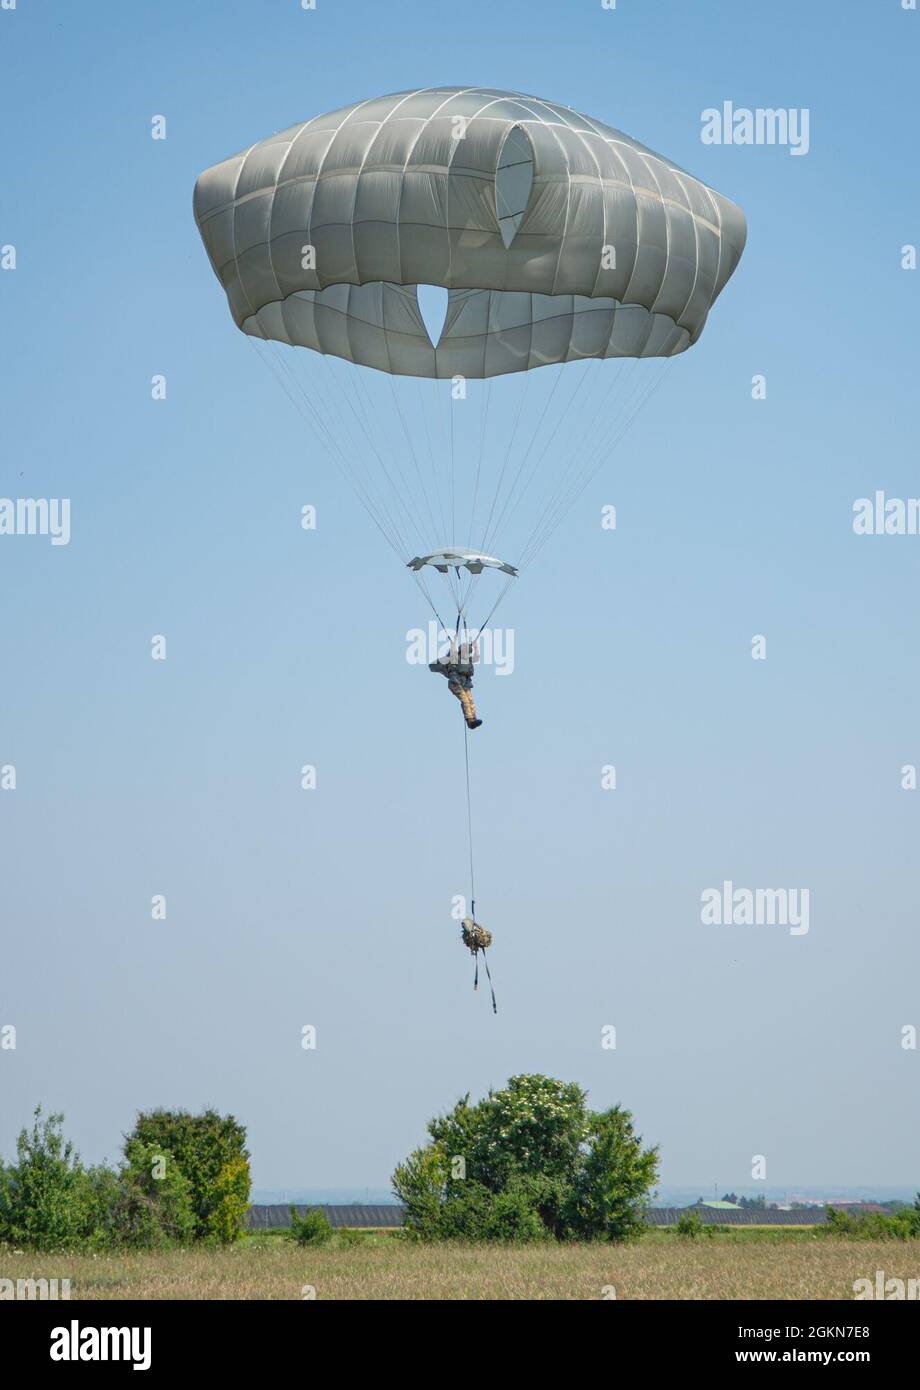 A British Army paratrooper assigned to Charlie (Bruneval) Company, 2 PARA prepares to land at Juliet Drop Zone during sustained airborne training, June 3, 2021. This training gave all participating paratroopers the opportunity to learn from each other and see each others tactics, techniques and procedures.     The 173rd Airborne Brigade is the U.S. Army's Contingency Response Force in Europe, providing rapidly deployable forces to the United States Europe, Africa and Central Command areas of responsibility. Forward deployed across Italy and Germany, the brigade routinely trains alongside NATO Stock Photo